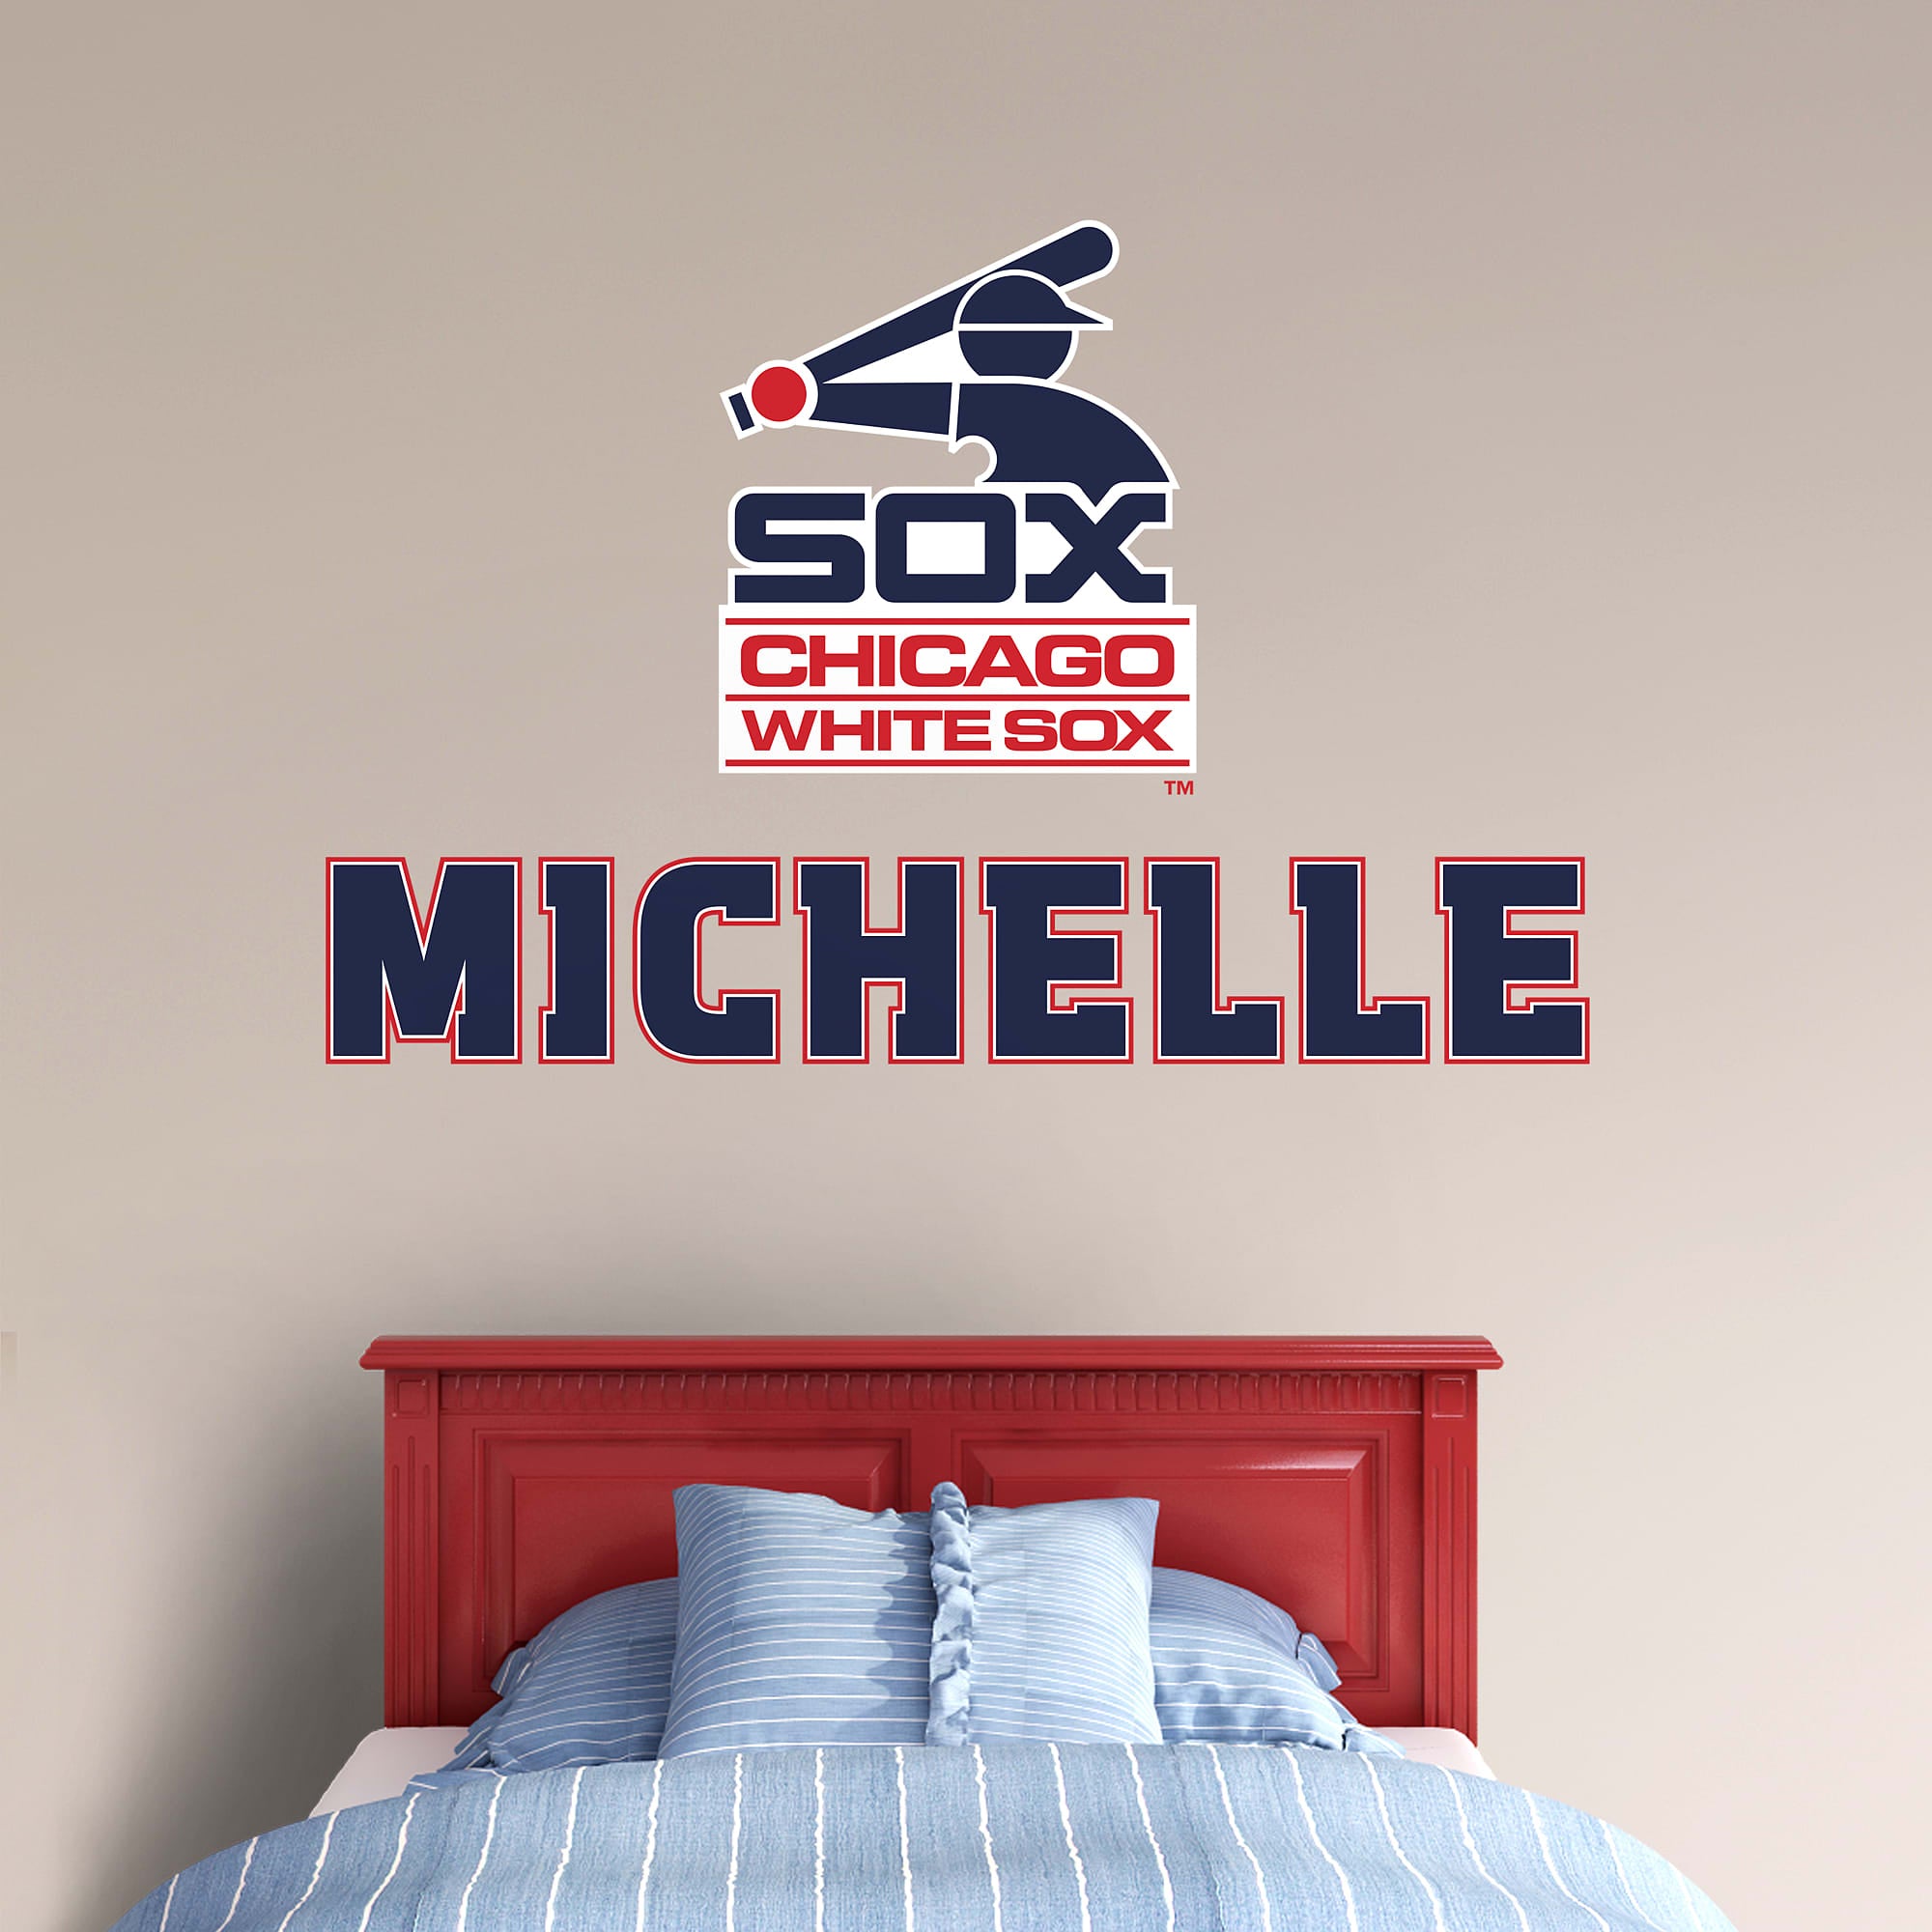 Chicago White Sox: Classic Stacked Personalized Name - Officially Licensed MLB Transfer Decal in Navy (52"W x 39.5"H) by Fathead